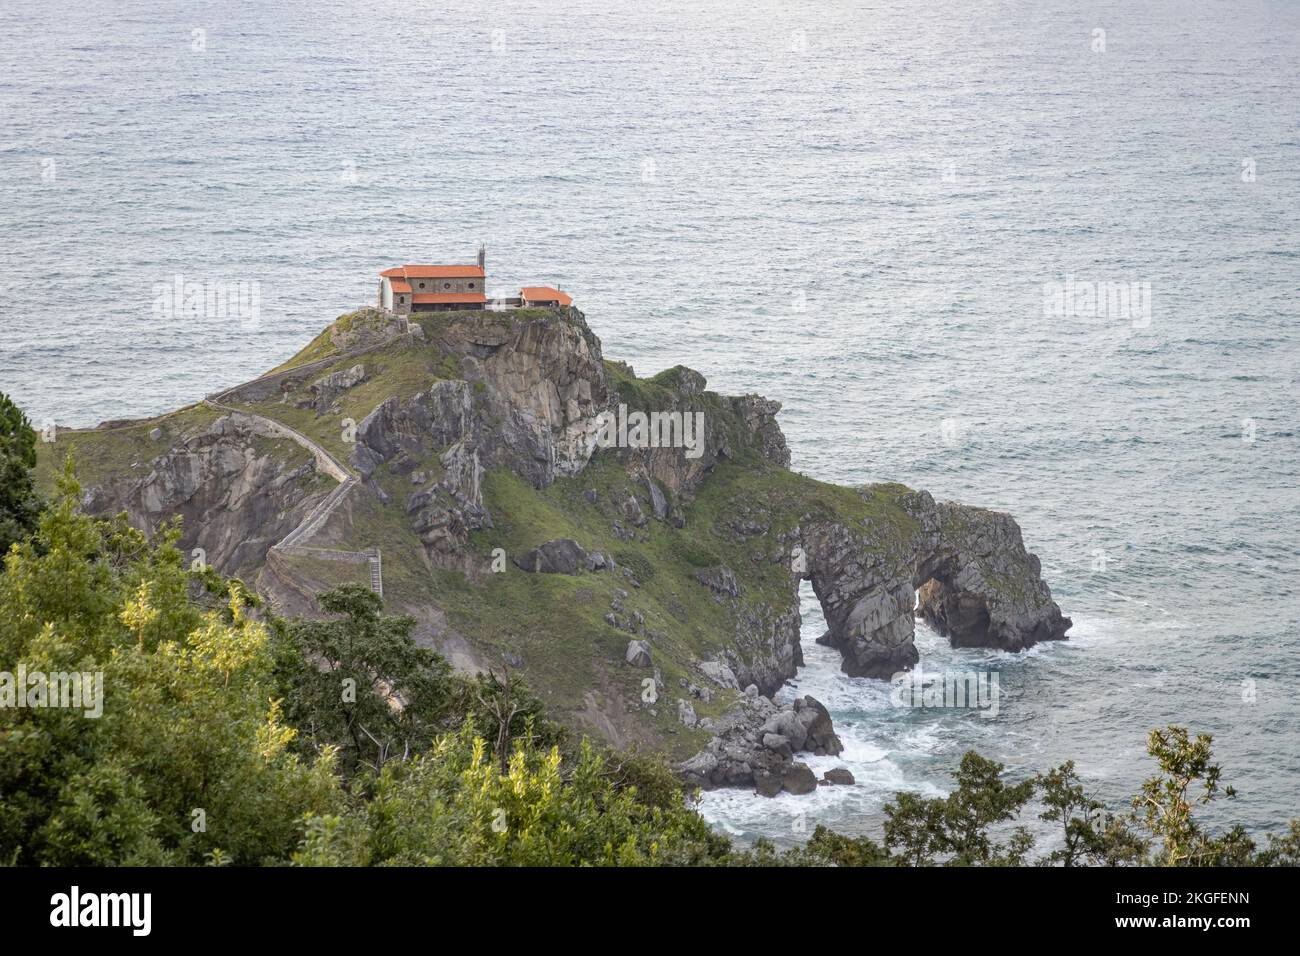 Aerial view of Island (Islet) and the Gaztelugatxe temple in twilight.  Bermeo, Basque Country (Spain). Dragonstone. Stock Photo